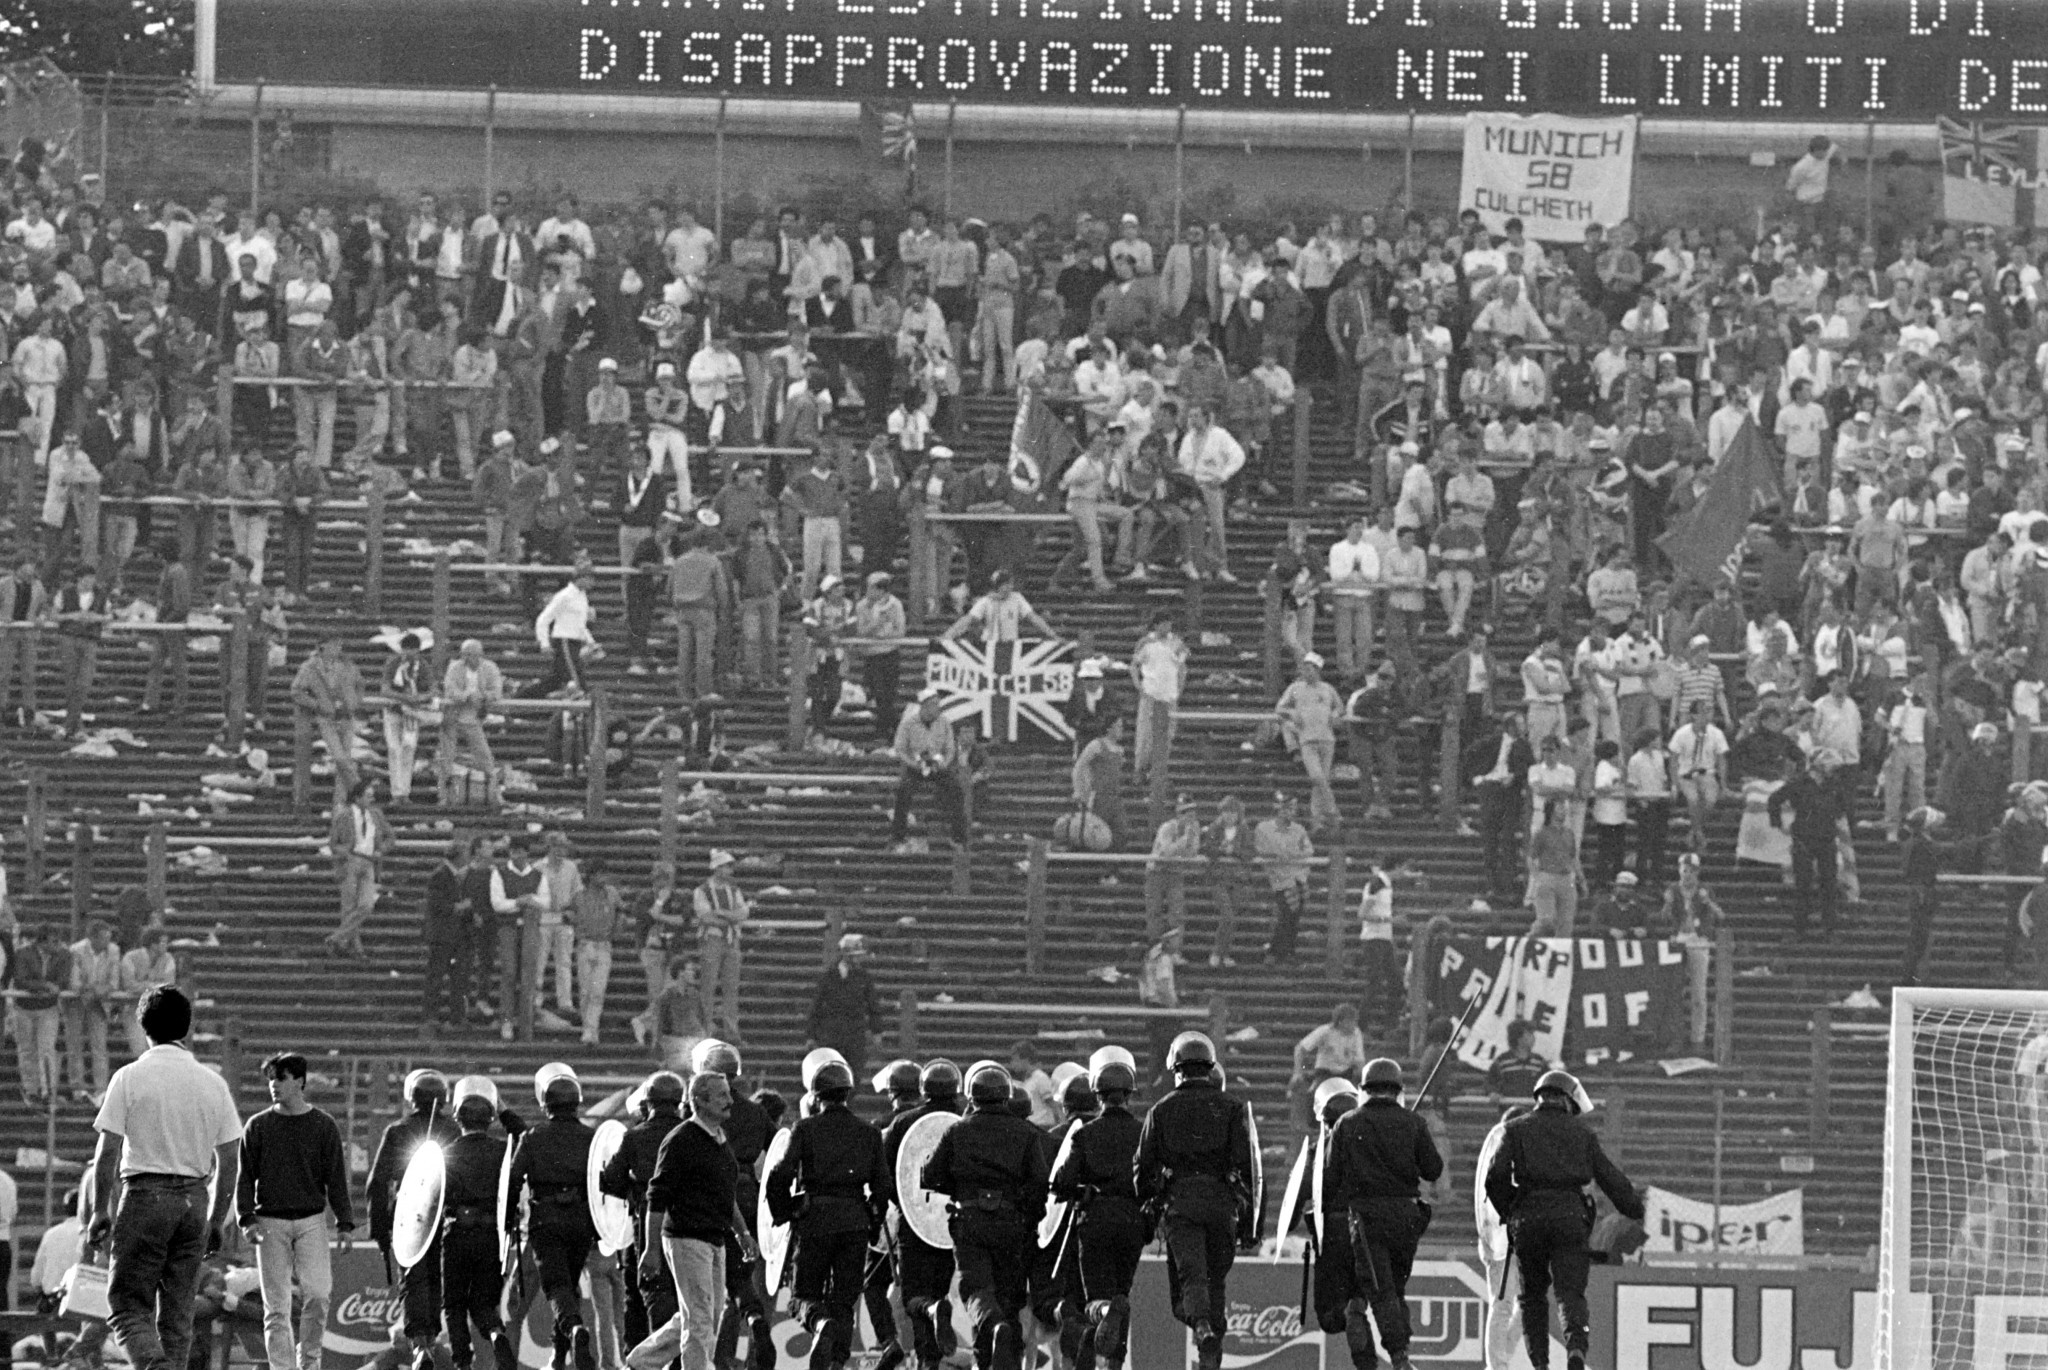 English clubs were banned from European competition after 39 Juventus fans were killed following violence at the 1985 European Cup final at Heysel Stadium in Brussels ©Getty Images